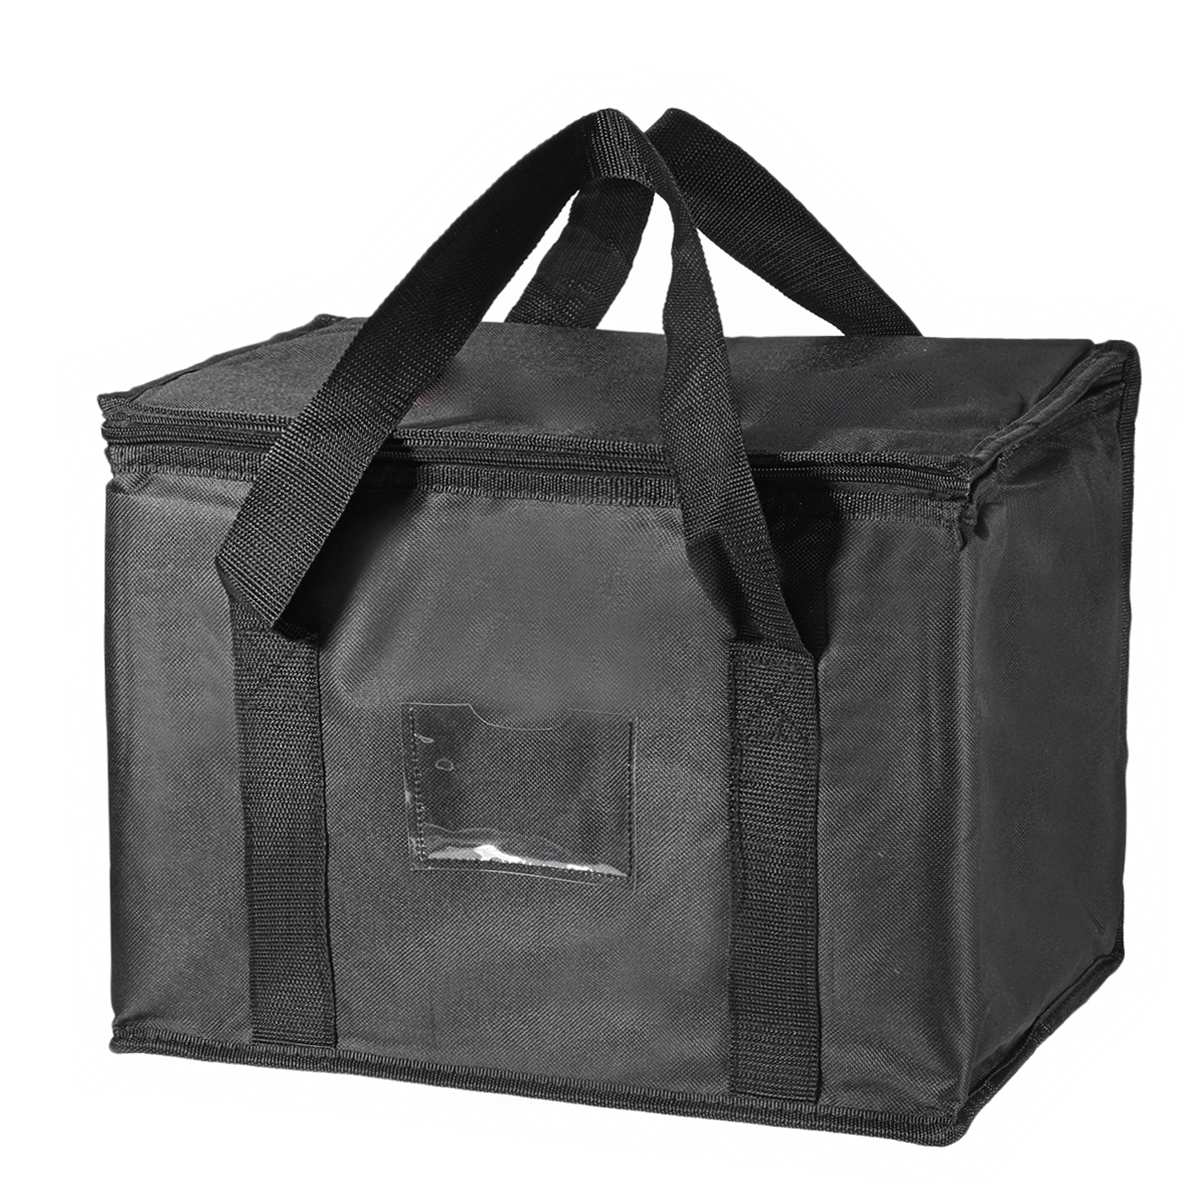 Sac isotherme 30/50/60 canettes pliable et isotherme grand sac à